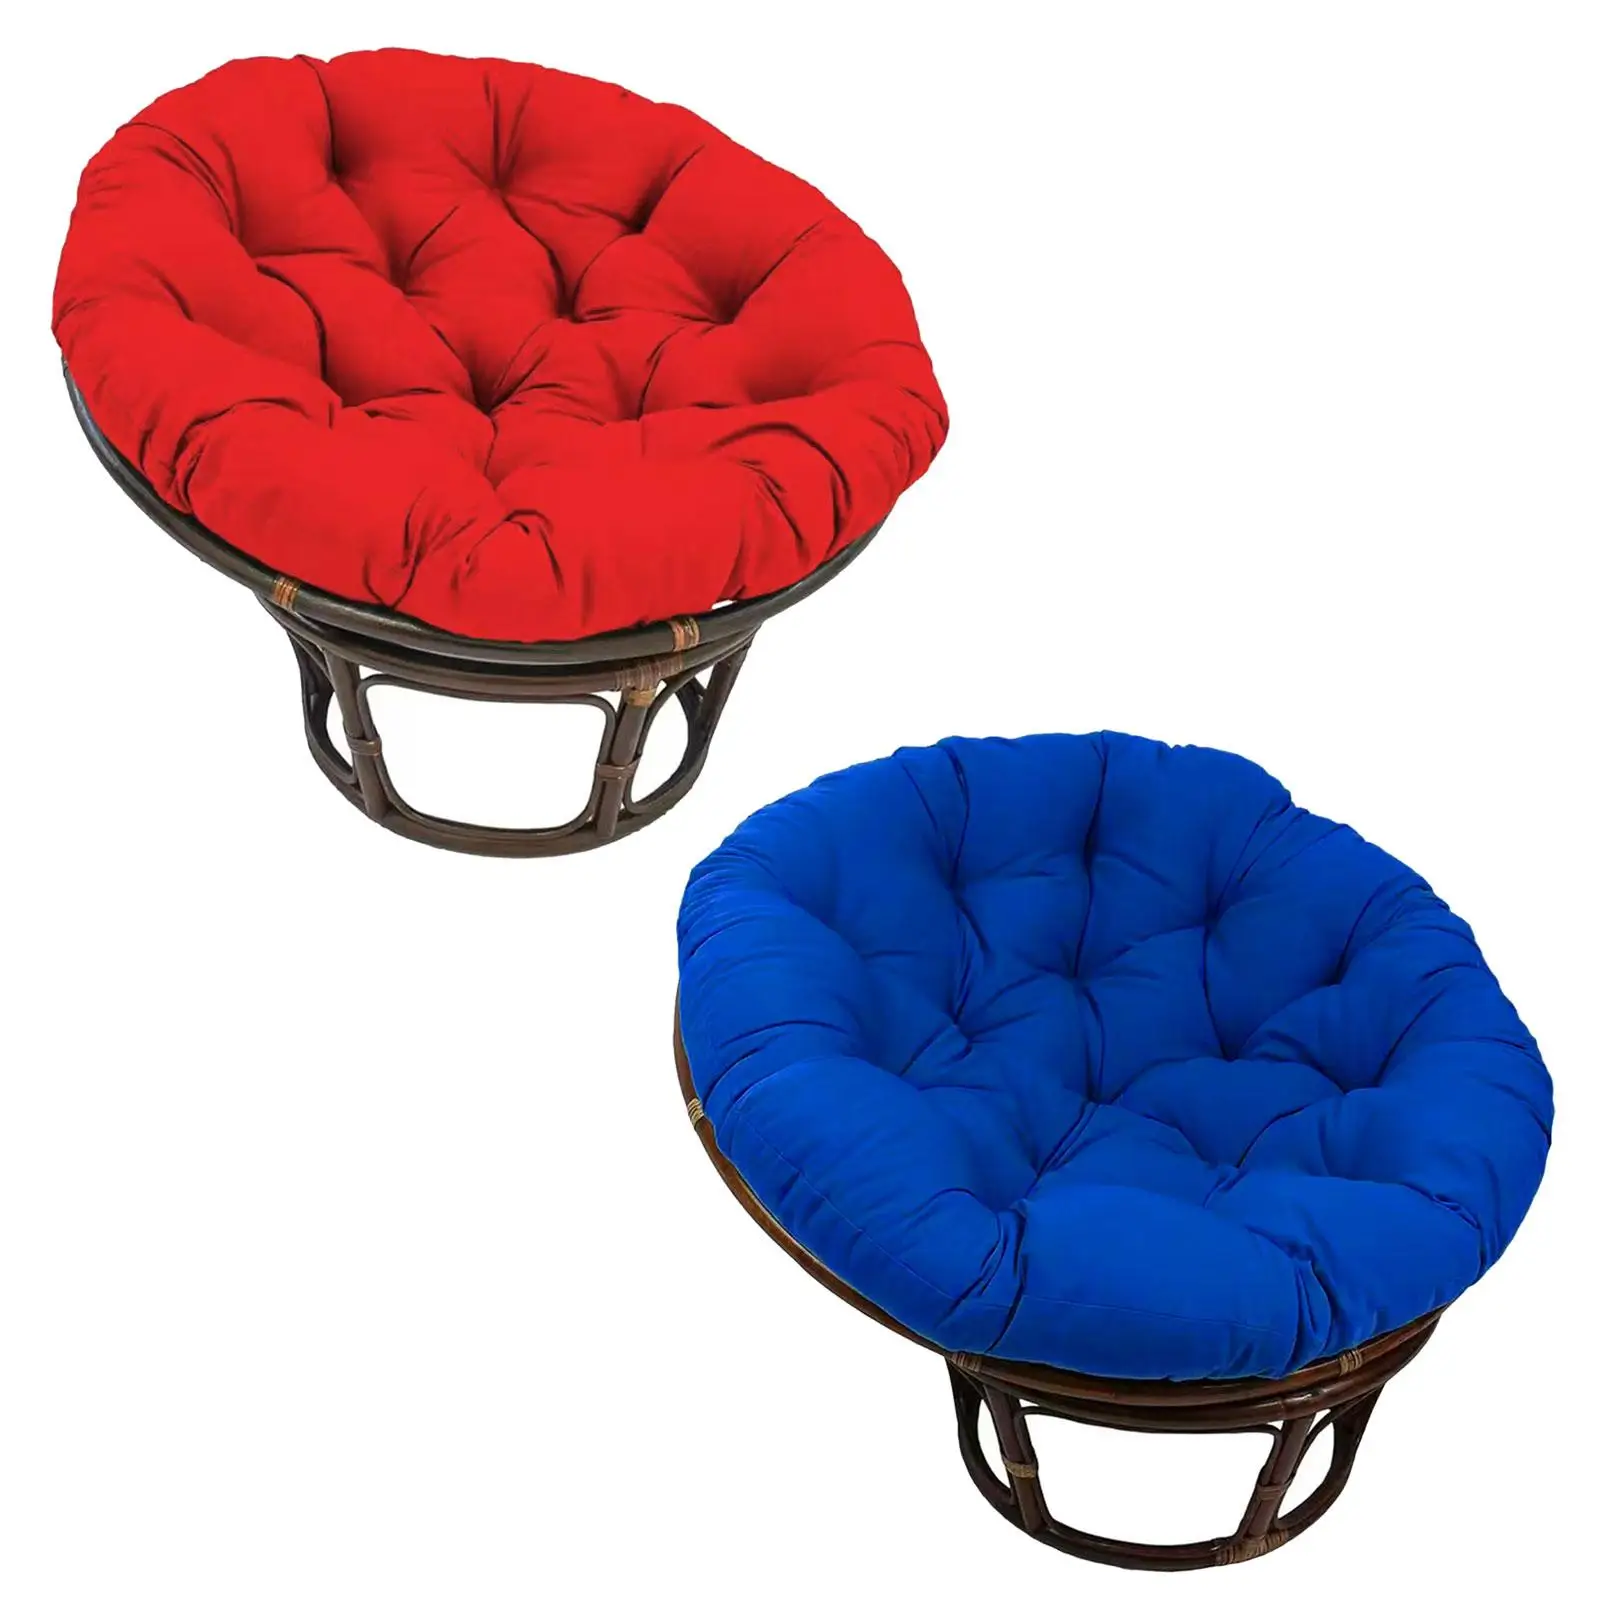 Egg Chair Cushion for Hanging Beds Hammock Chair Indoor or Outdoor Swing Chairs Garden Offices Hanging Baskets